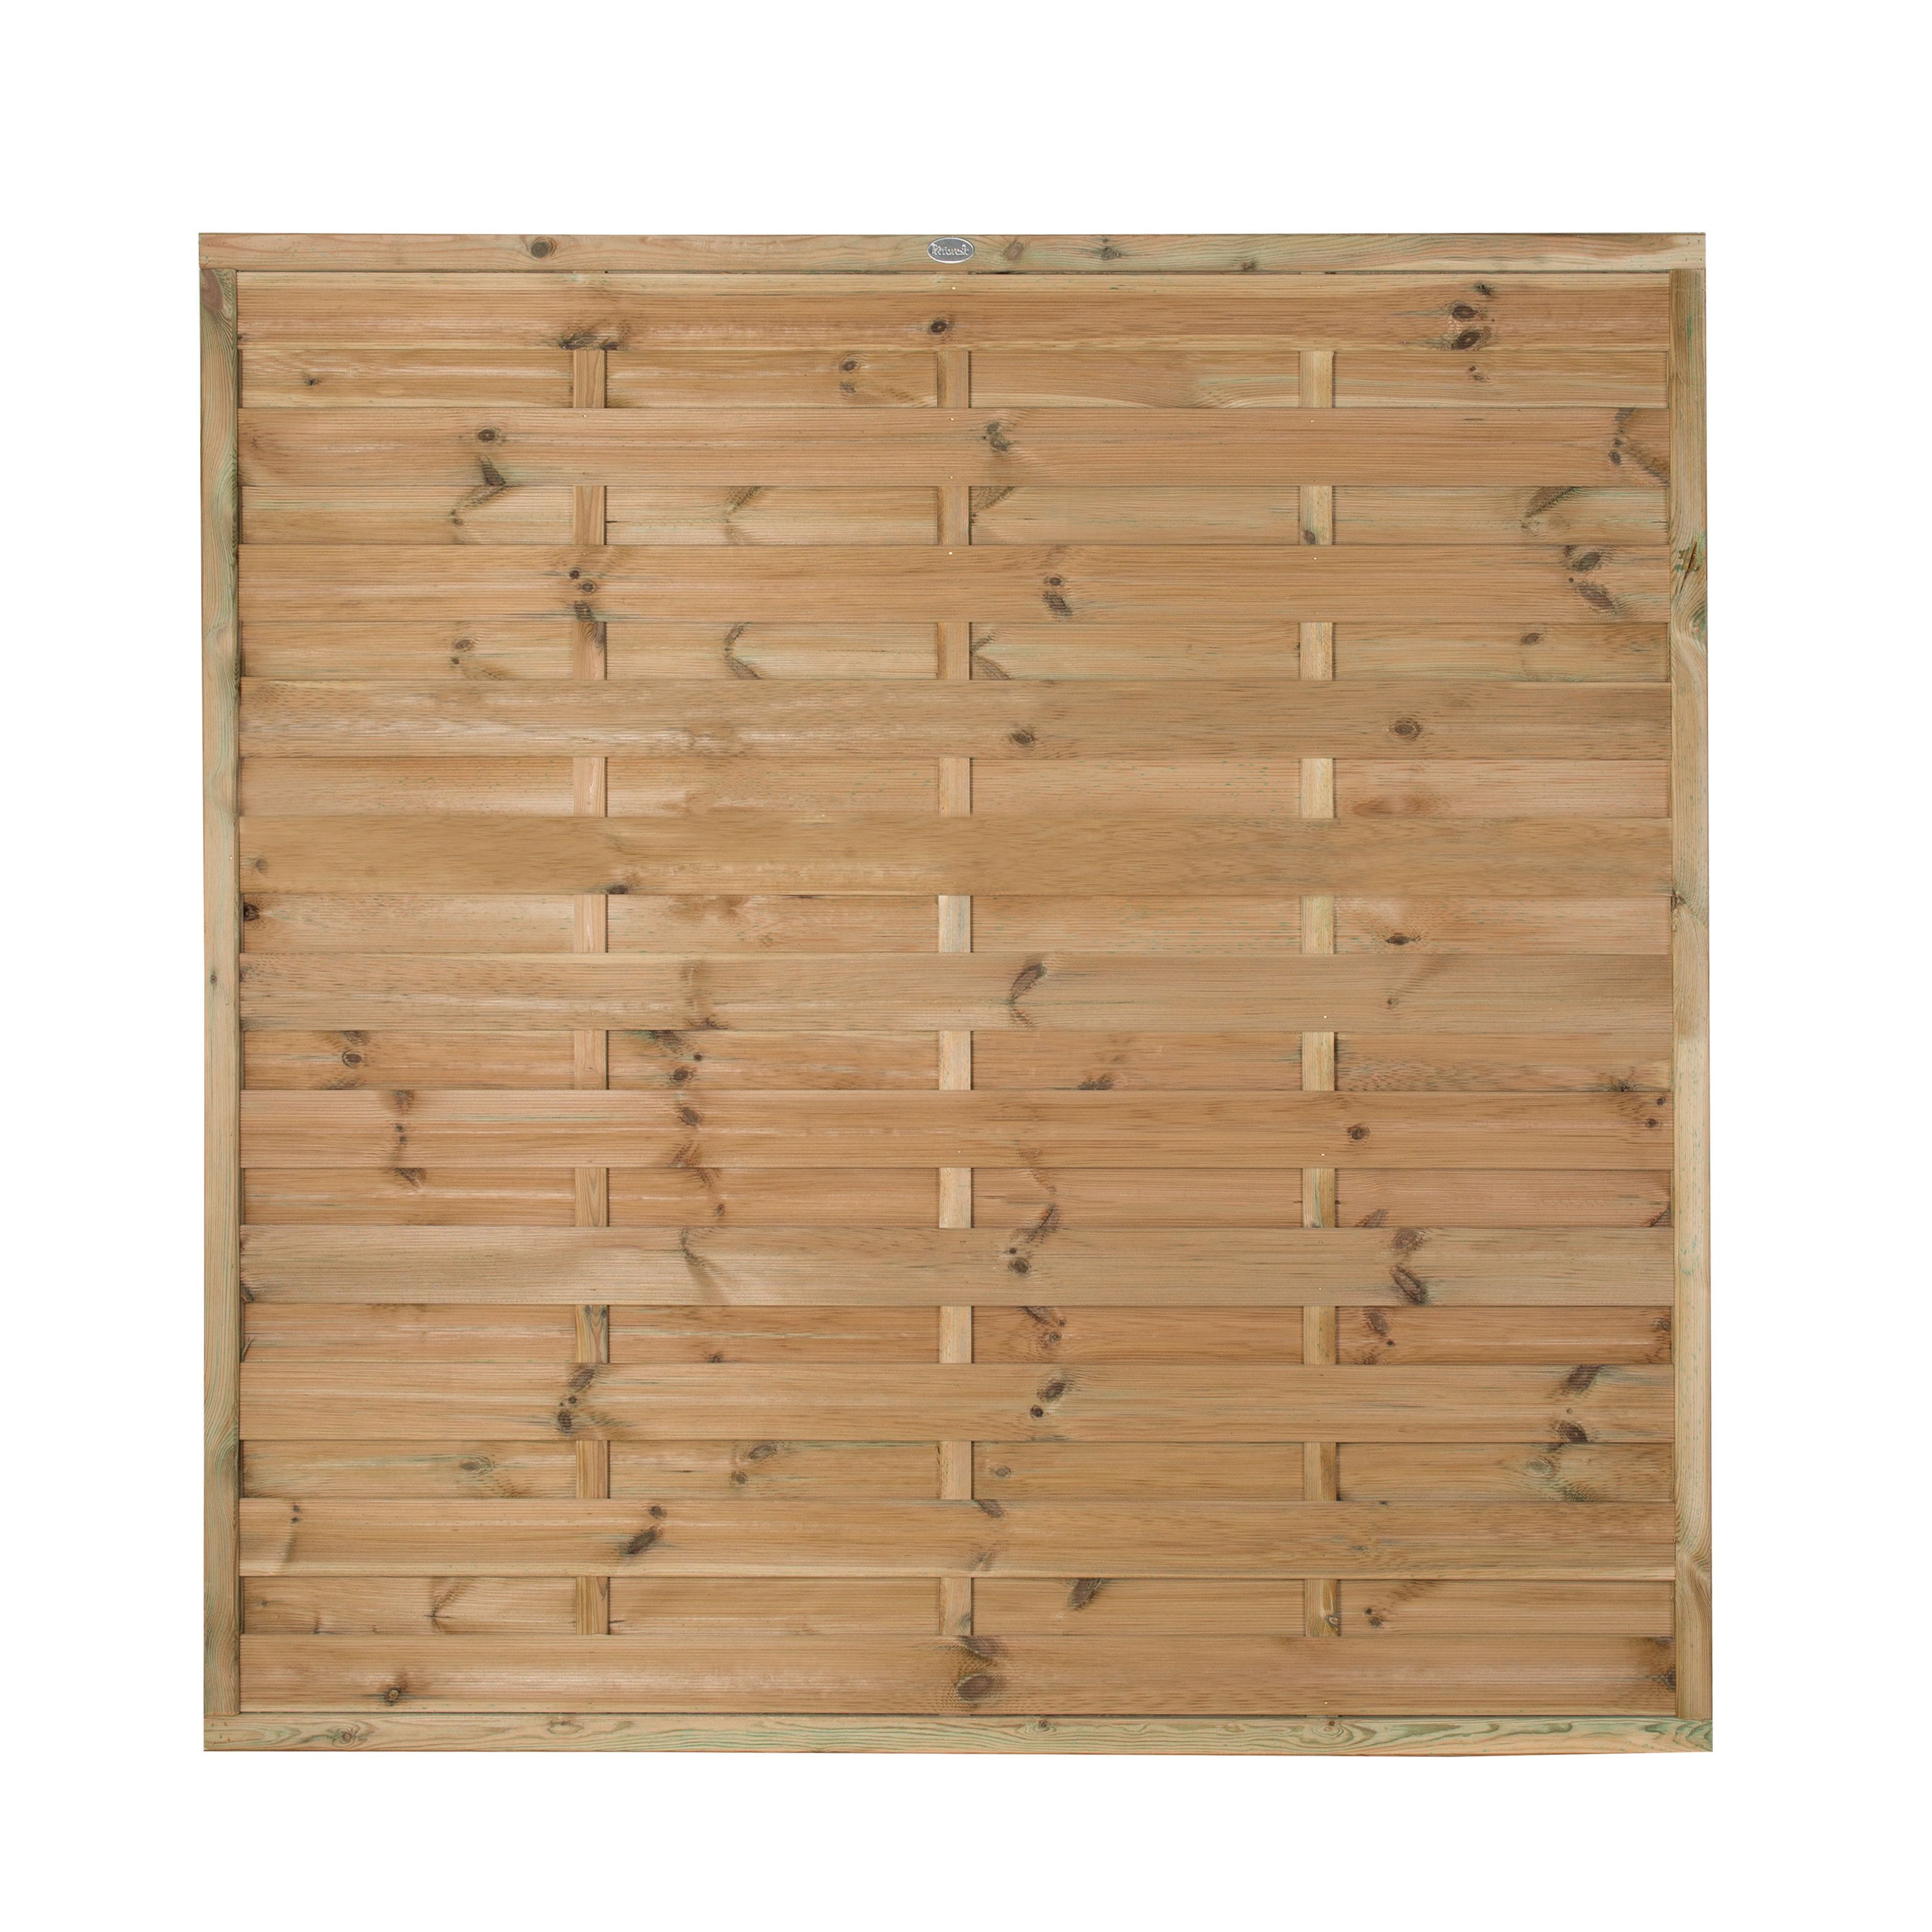 Image of Forest Garden Pressure Treated Horizontal Hit & Miss Fence Panel - 1800 x 1800mm - 6 x 6ft - Pack of 3